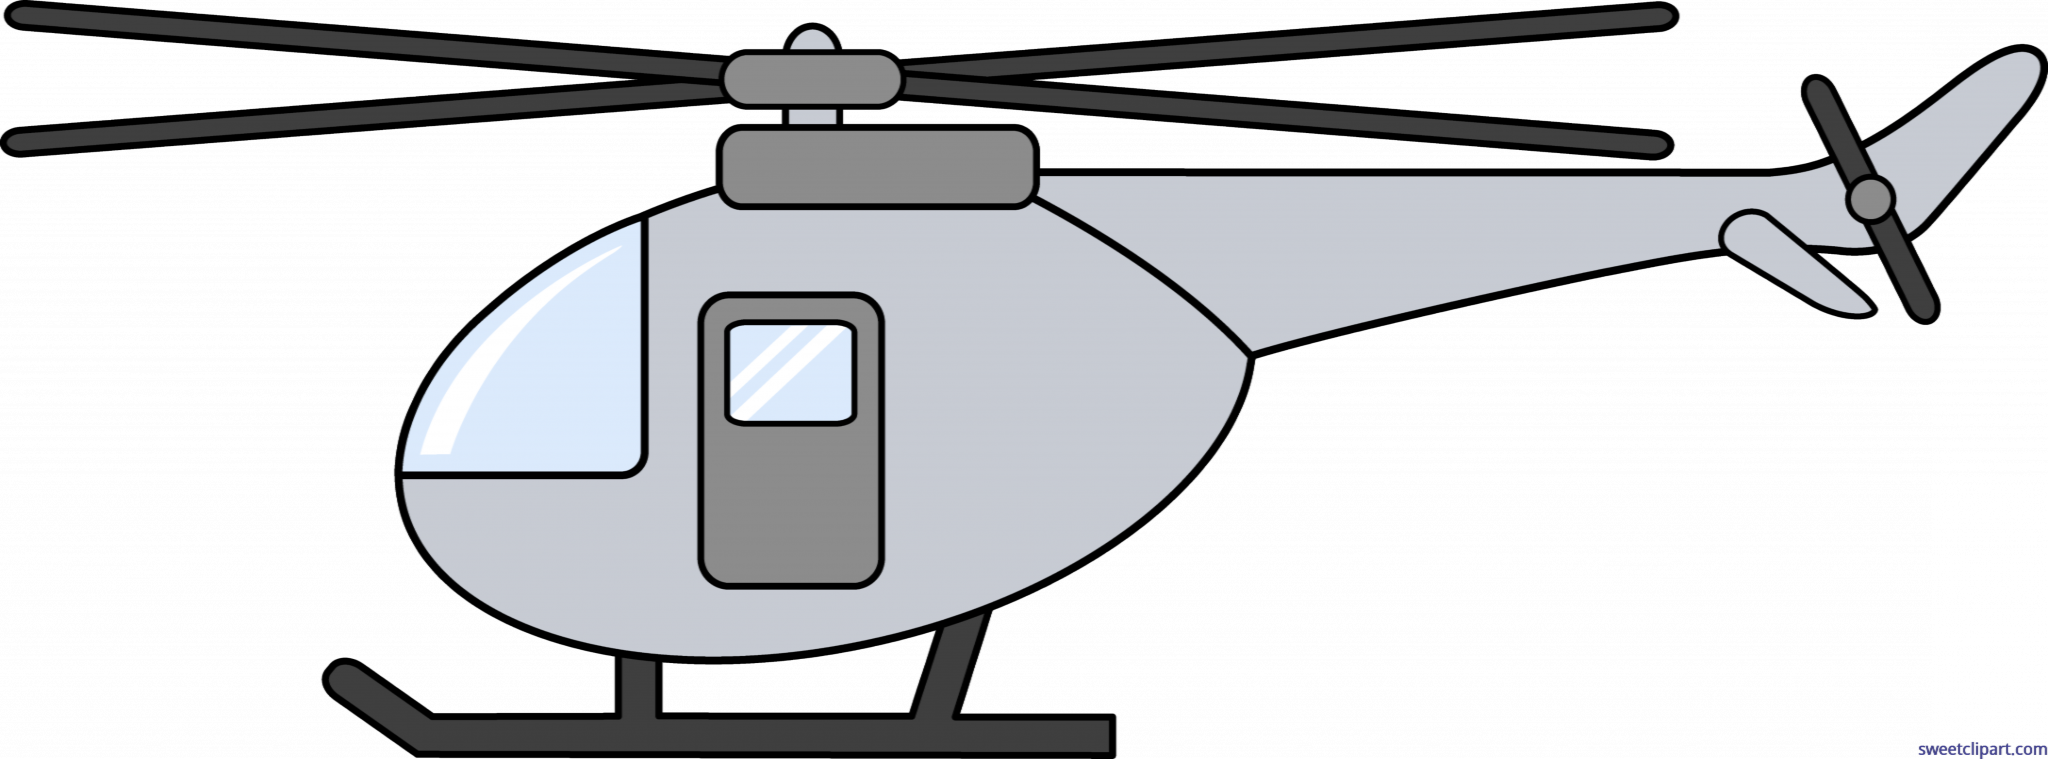 Helicopter Clip Art.